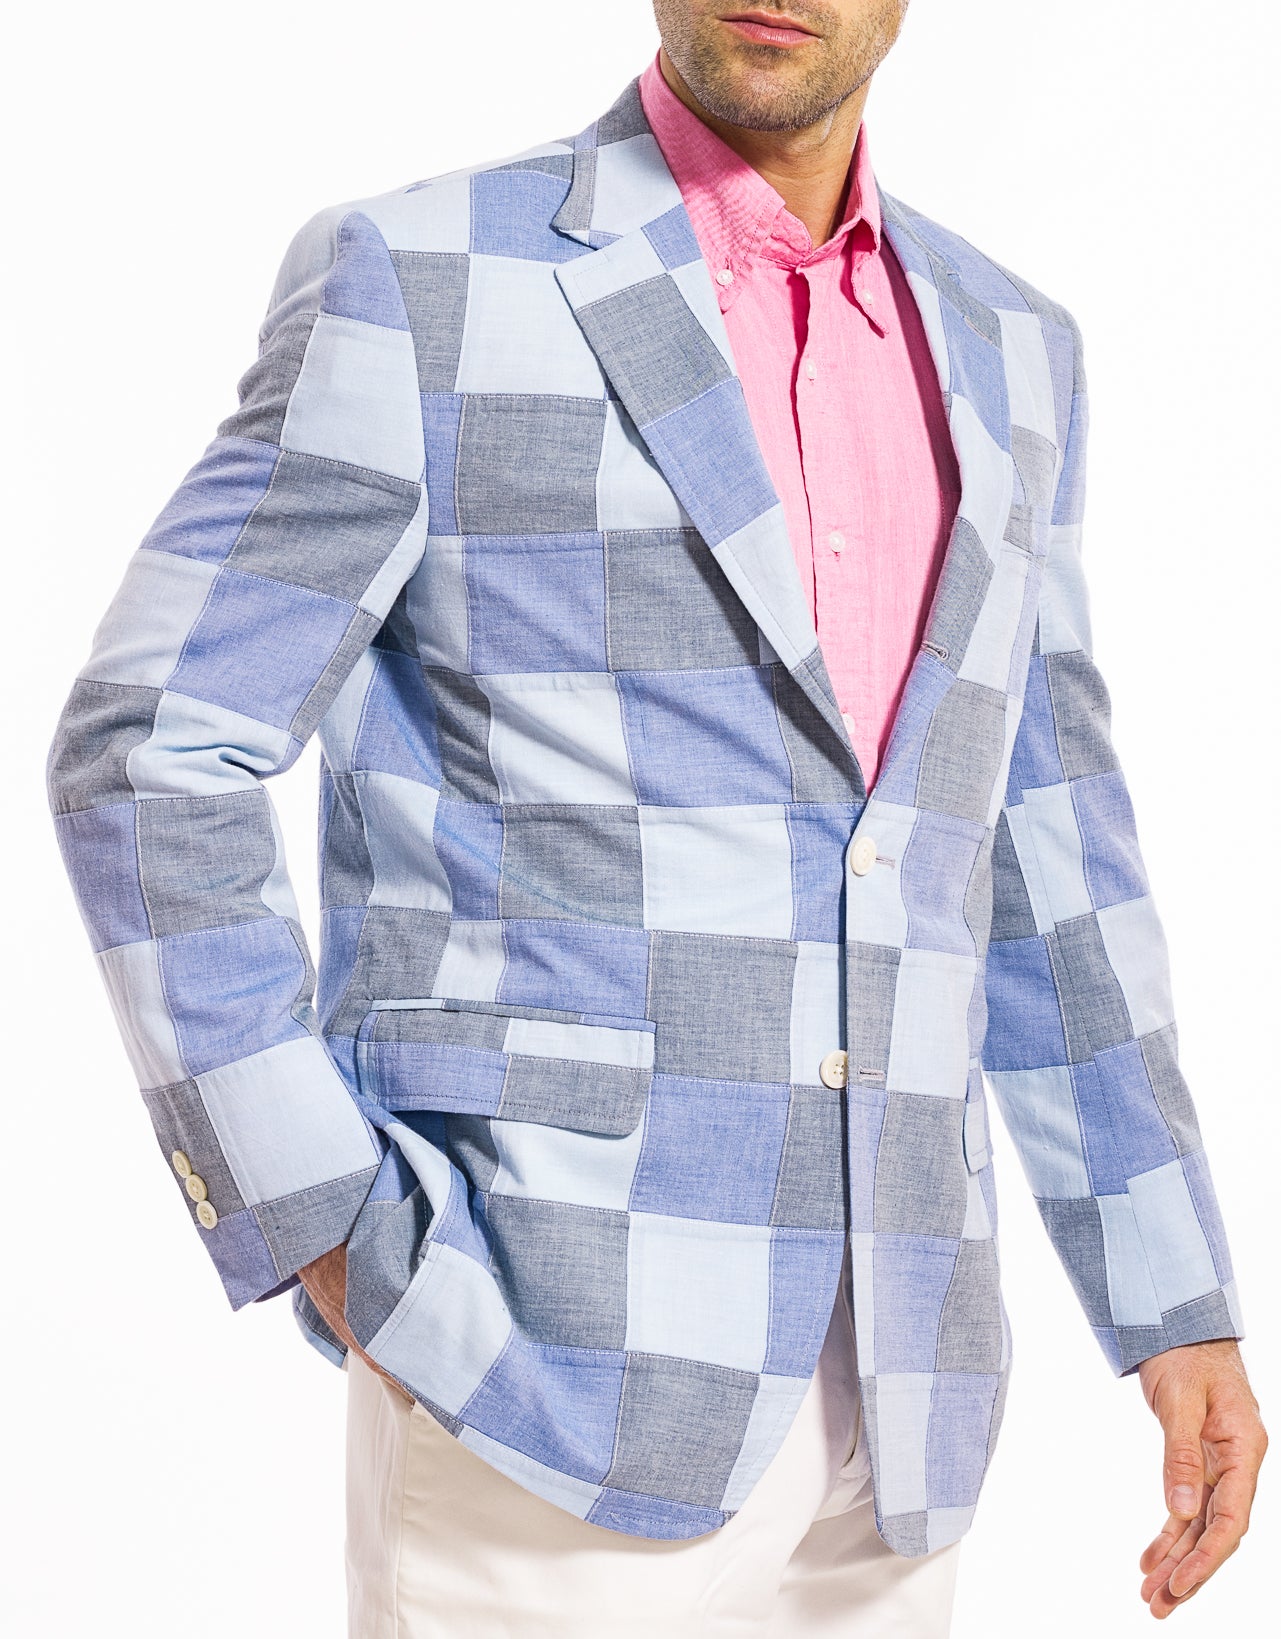 MULTI COLOR PATCH CHAMBRAY SPORT COAT - CLASSIC FIT